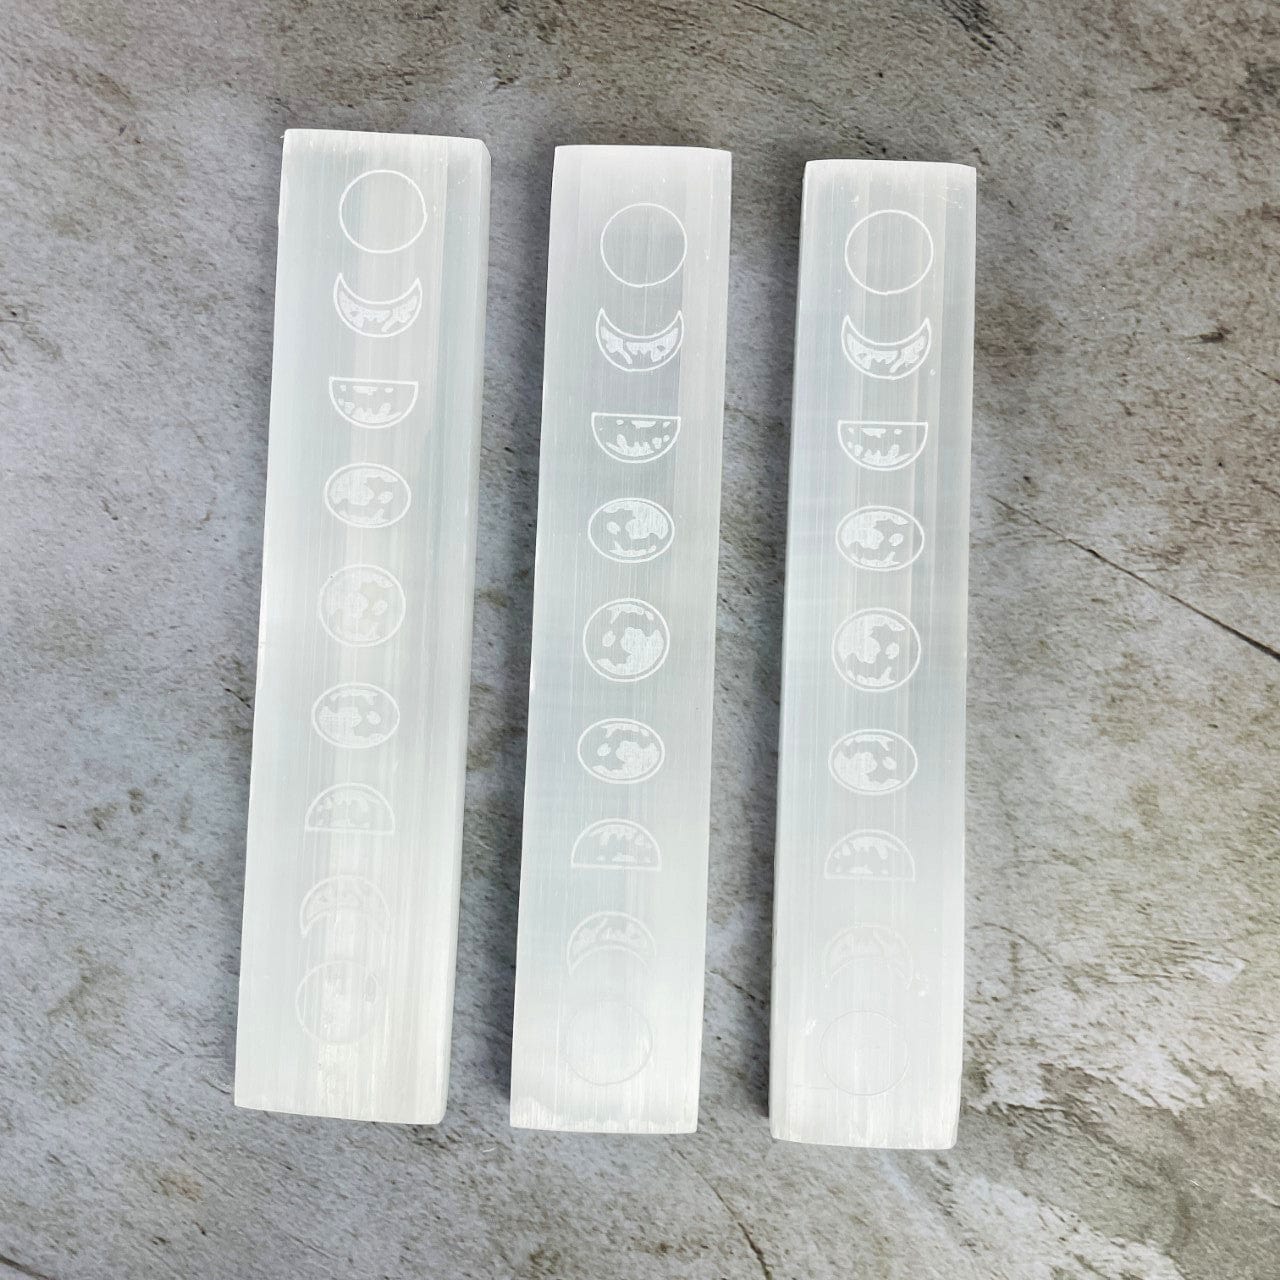 3 Selenite Charging Plates Engraved with Moon Phase Design